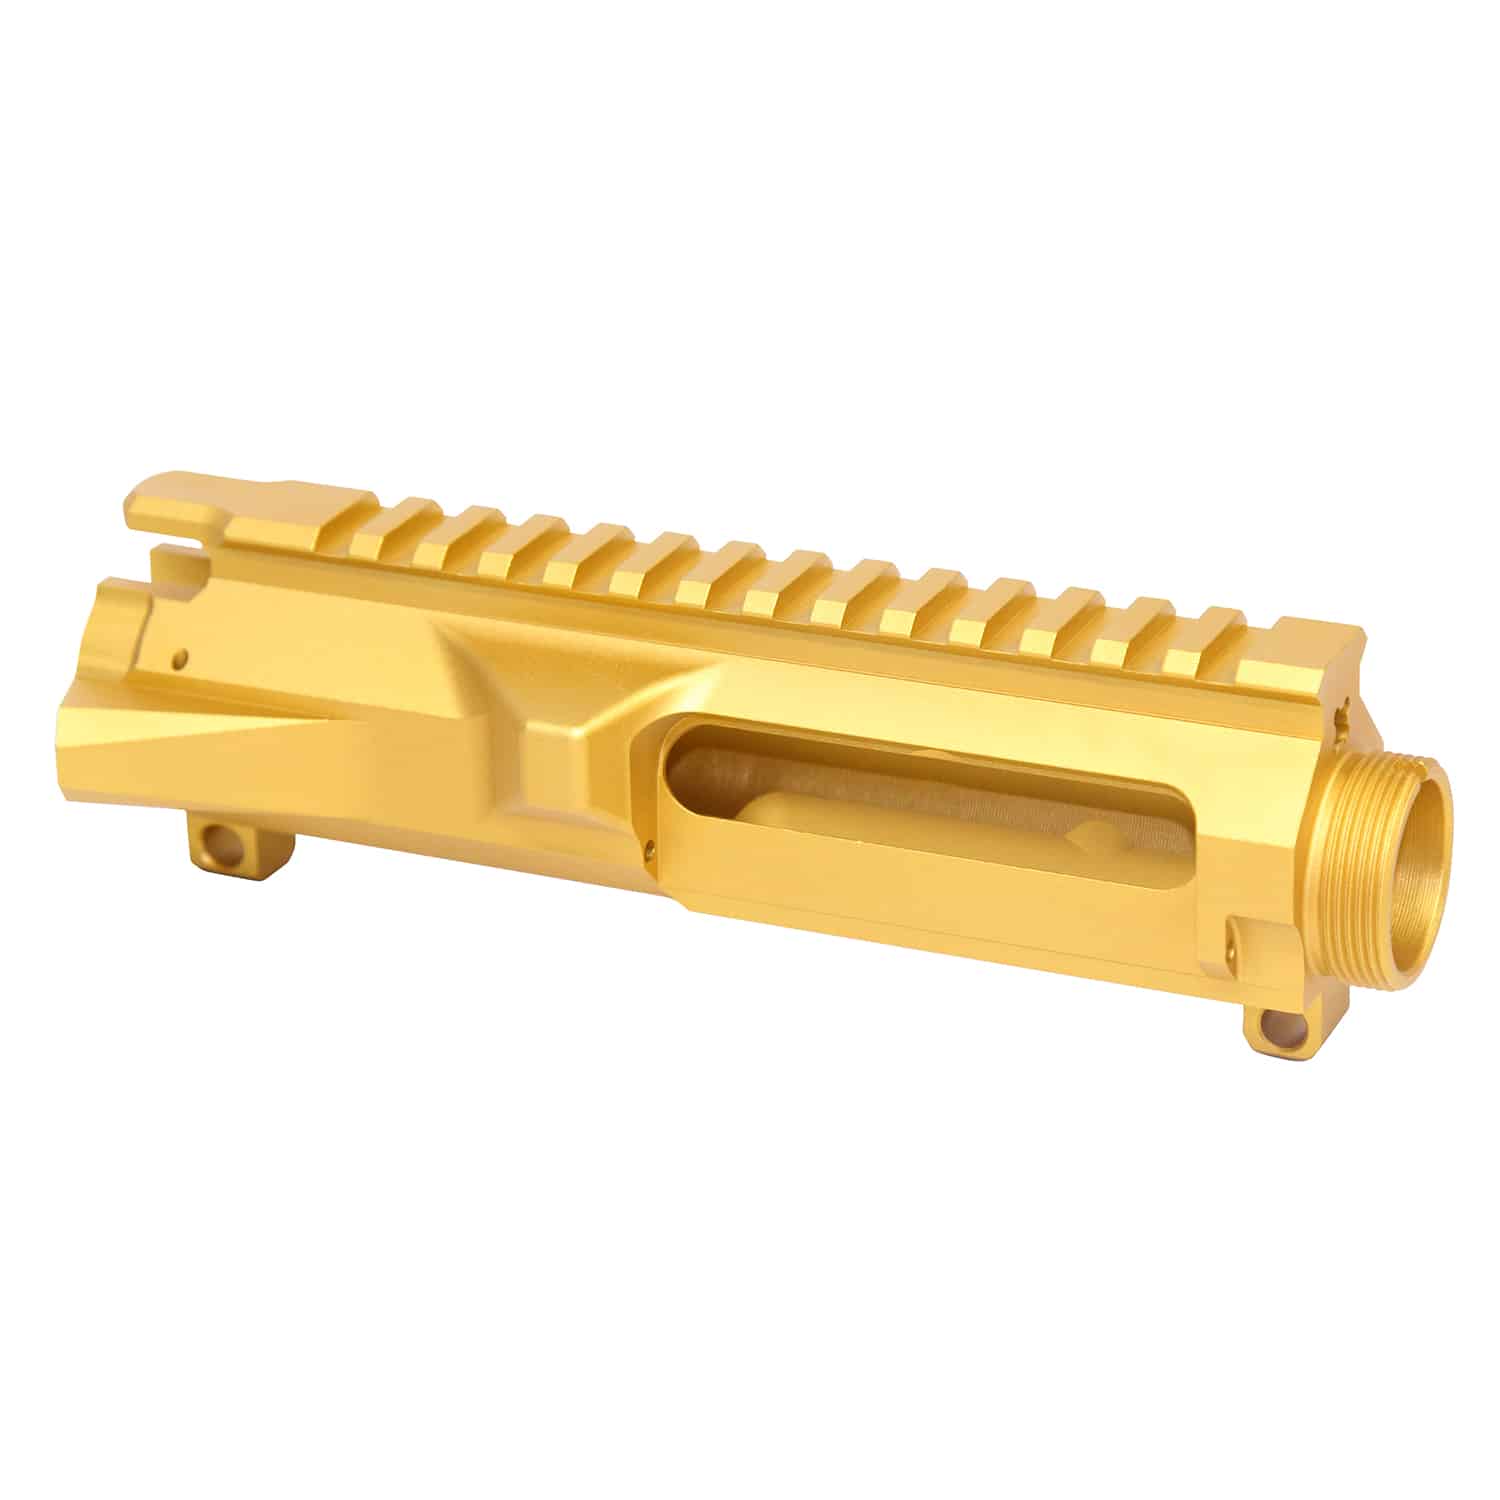 AR-15 Stripped Billet Upper Receiver (Anodized Gold)